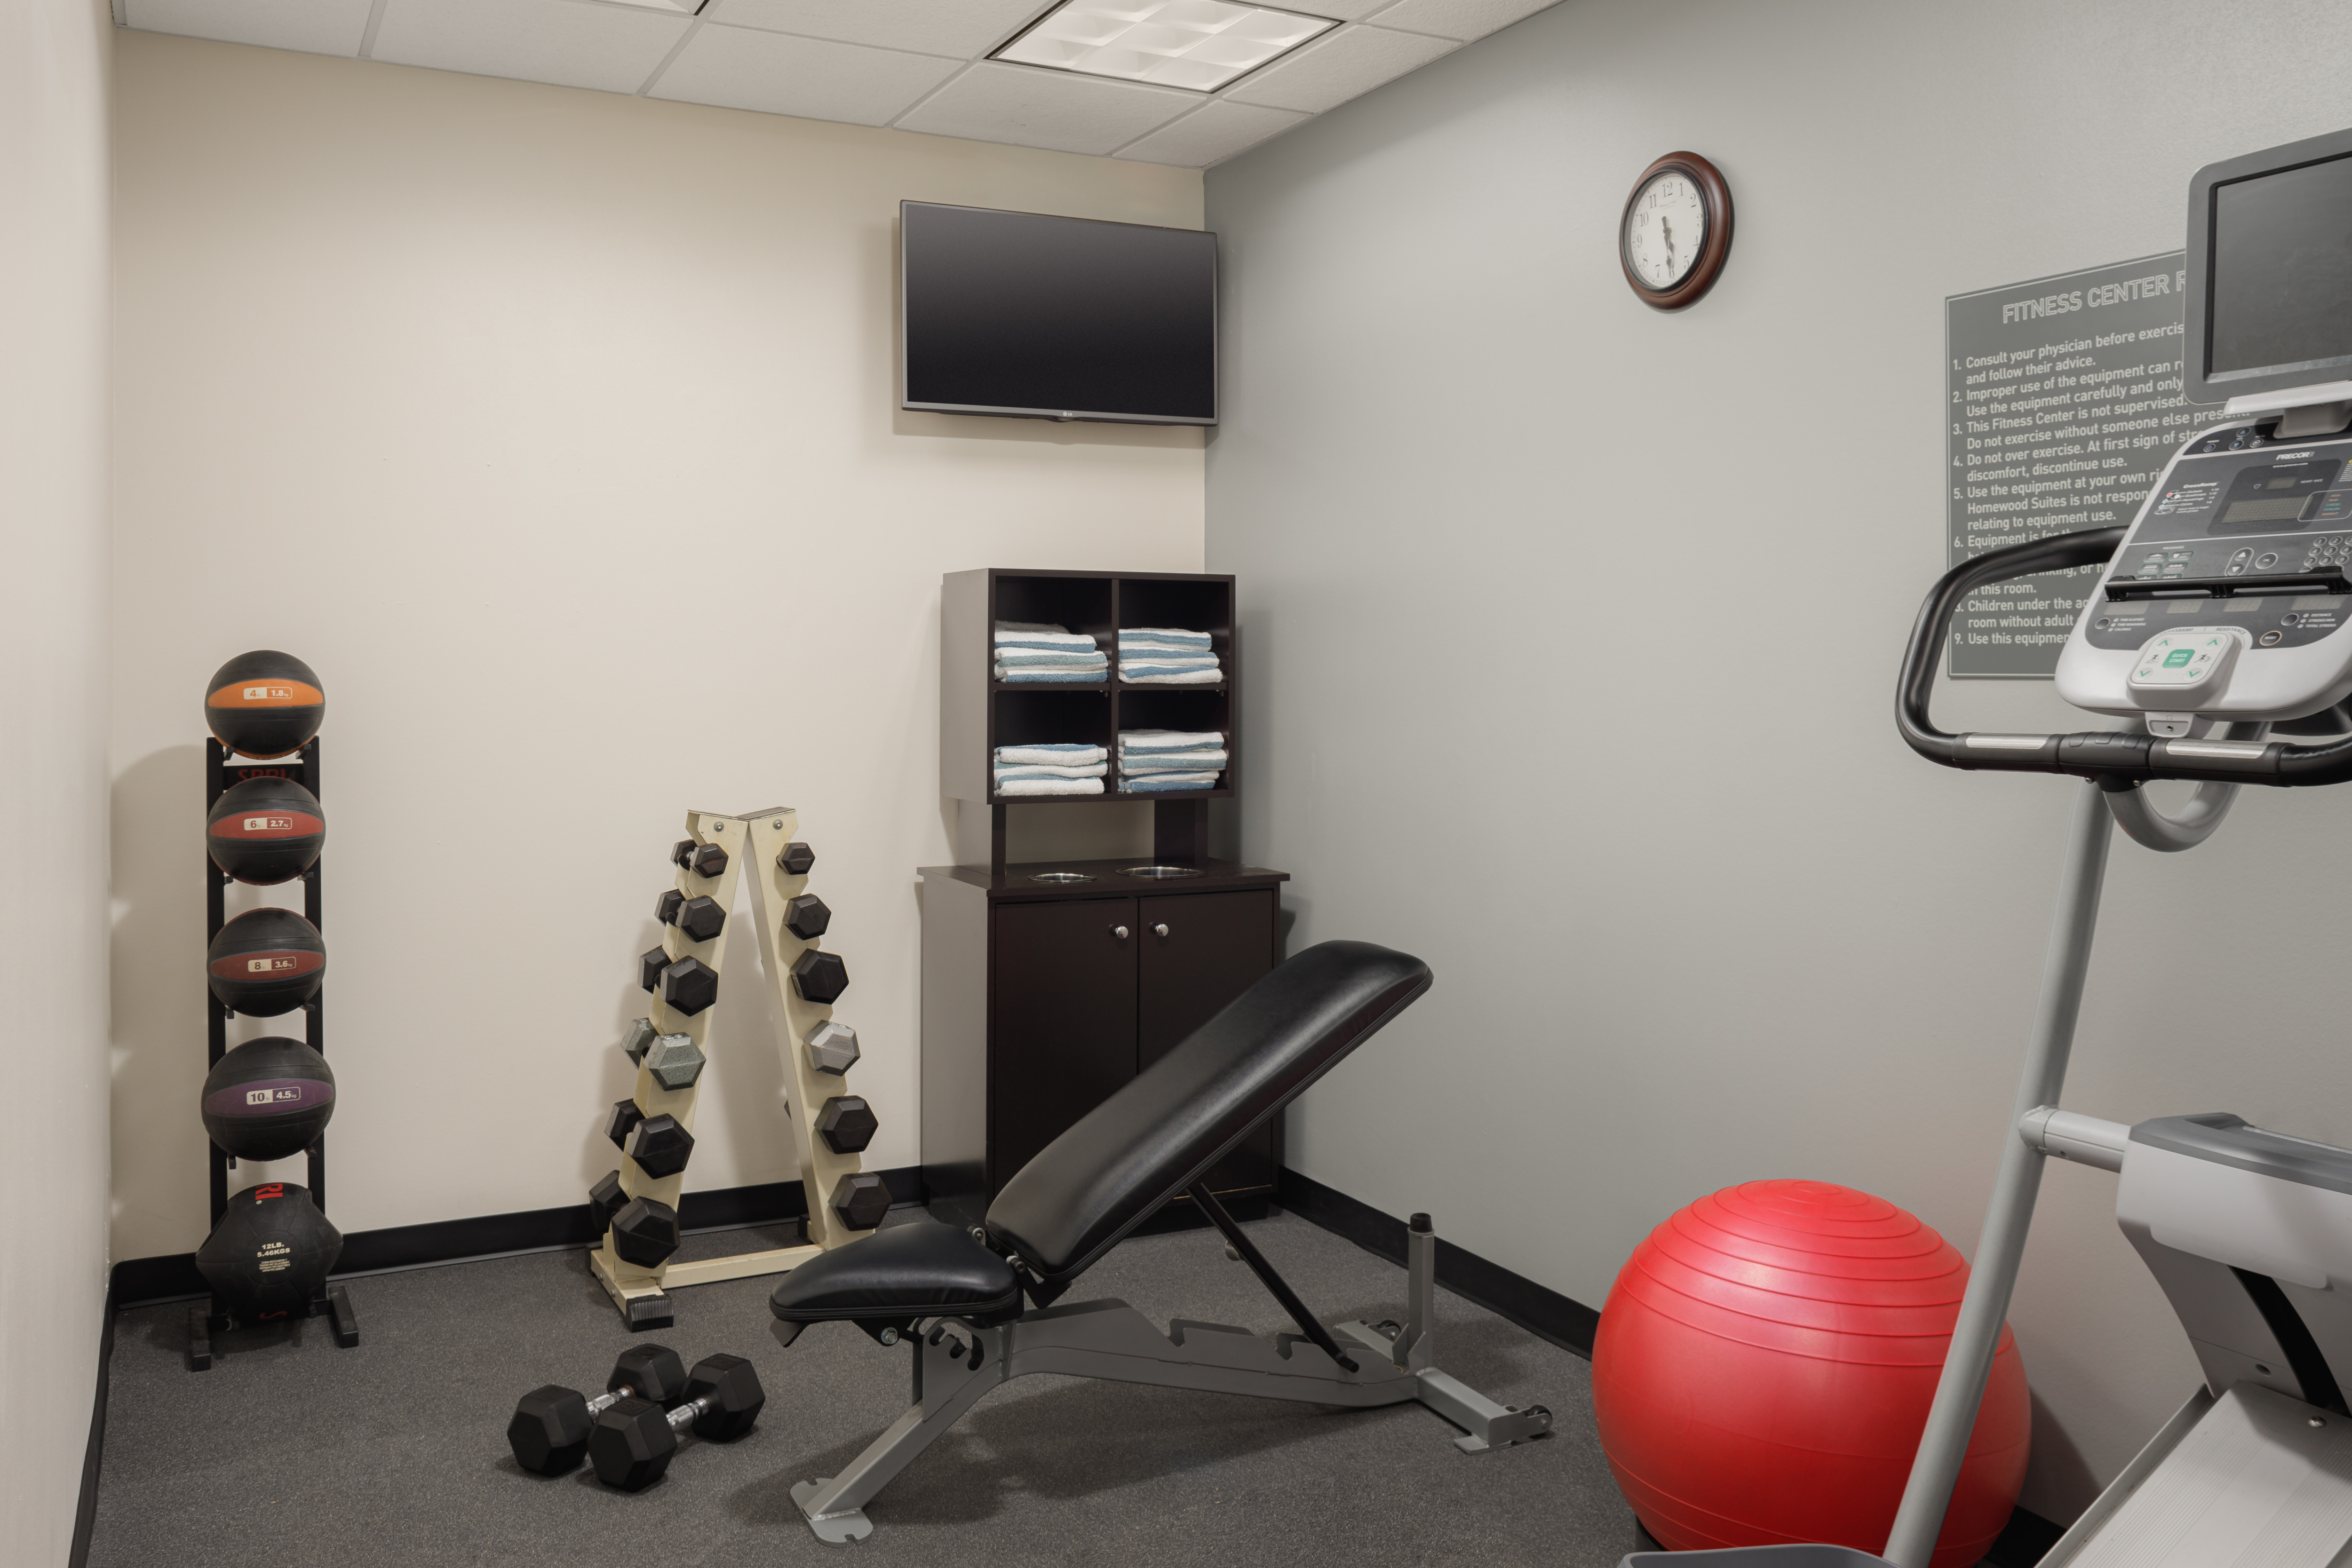 Exercise Balls and Weights in Fitness Room